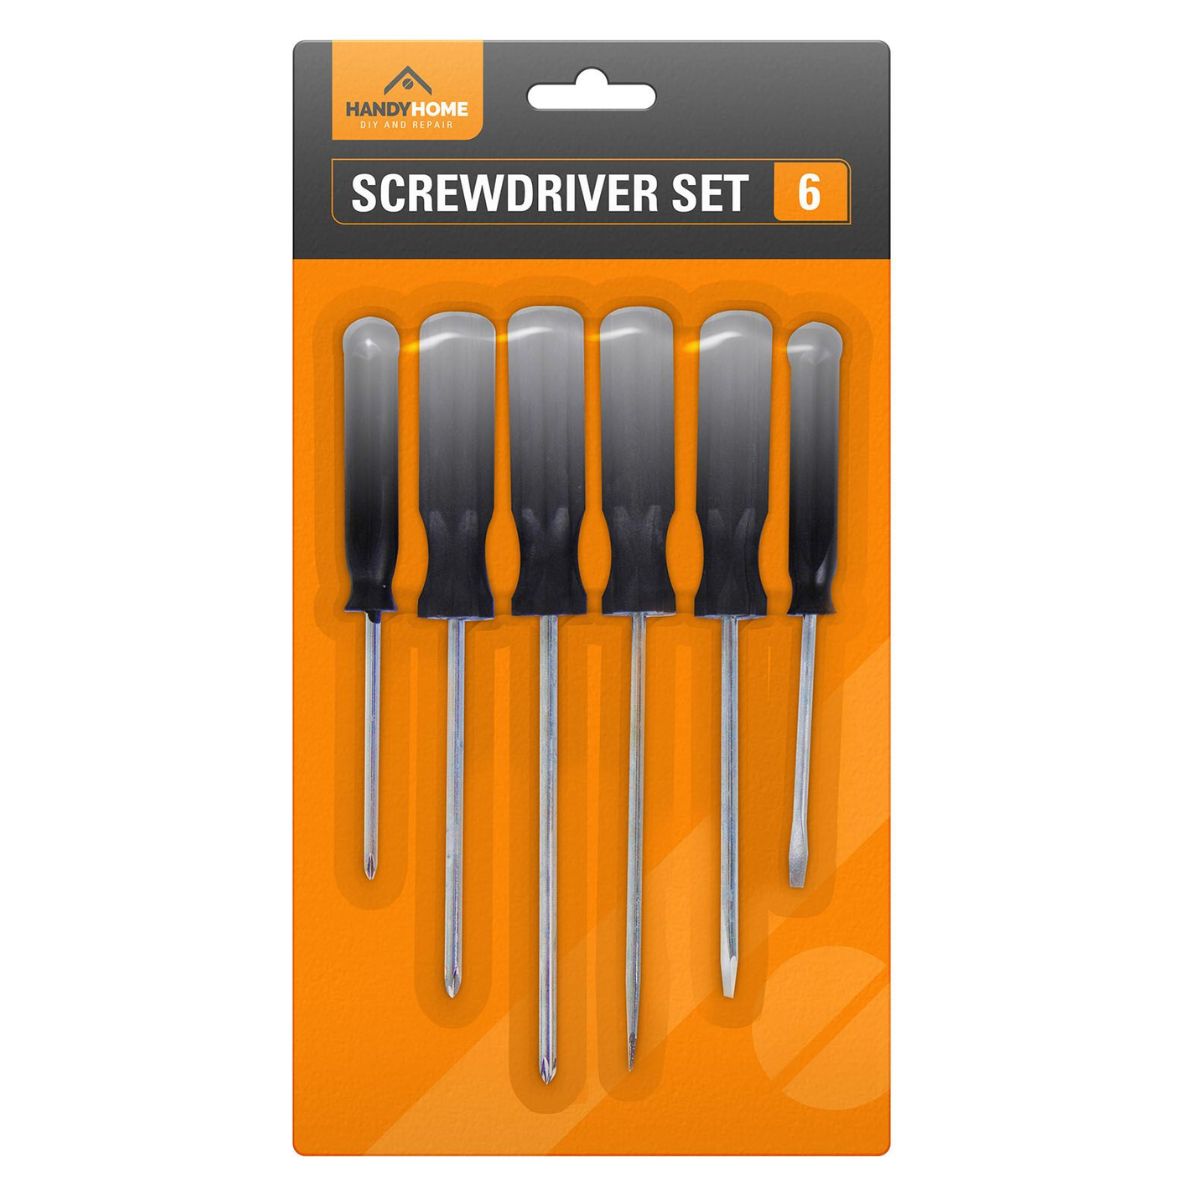 A Handy Home - Assorted Flat and Phillips Screwdrivers - 6pcs set in retail packaging.